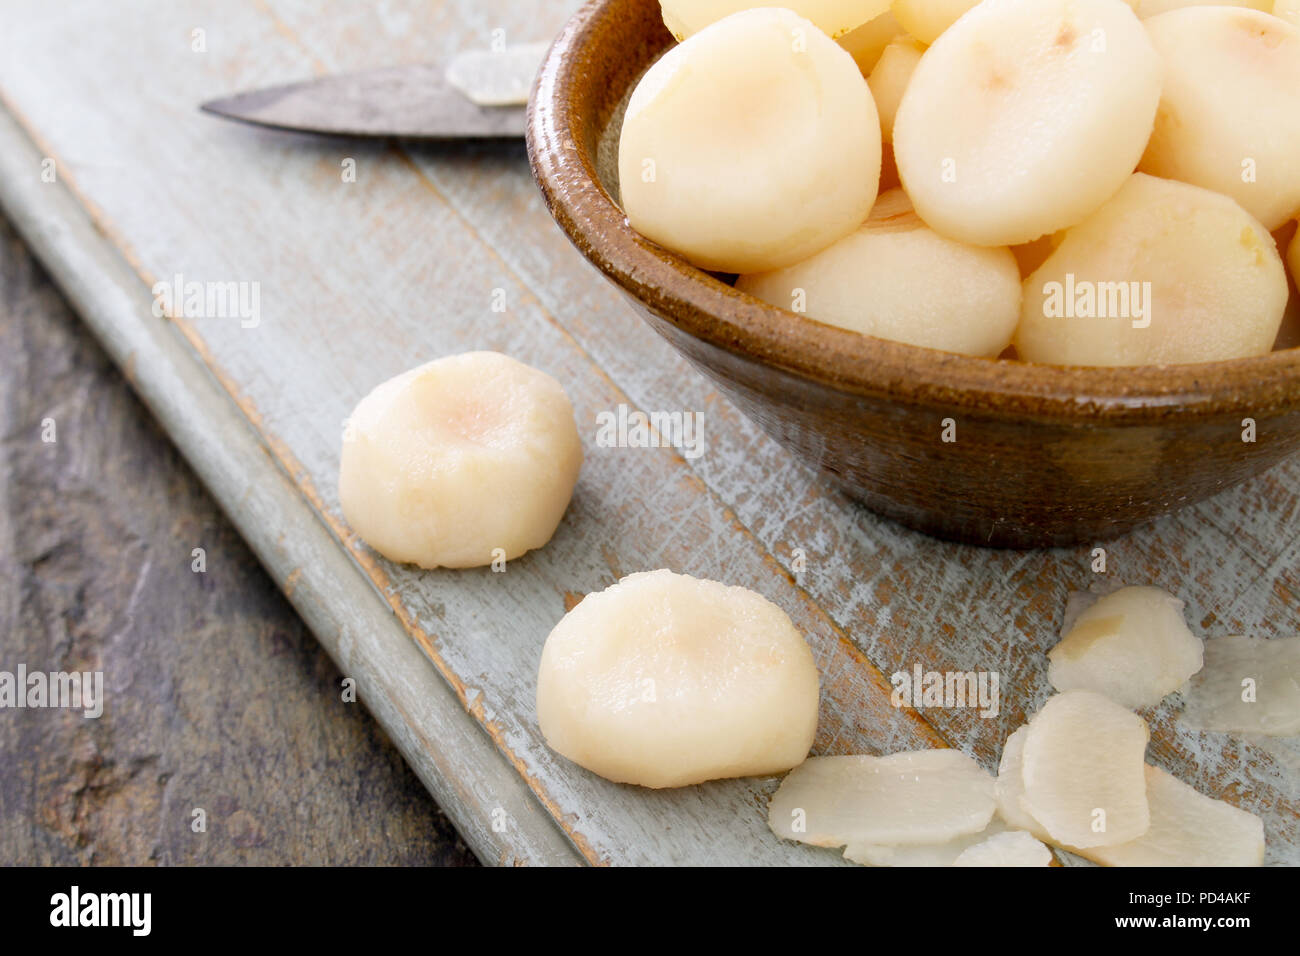 peeled water chestnuts Stock Photo